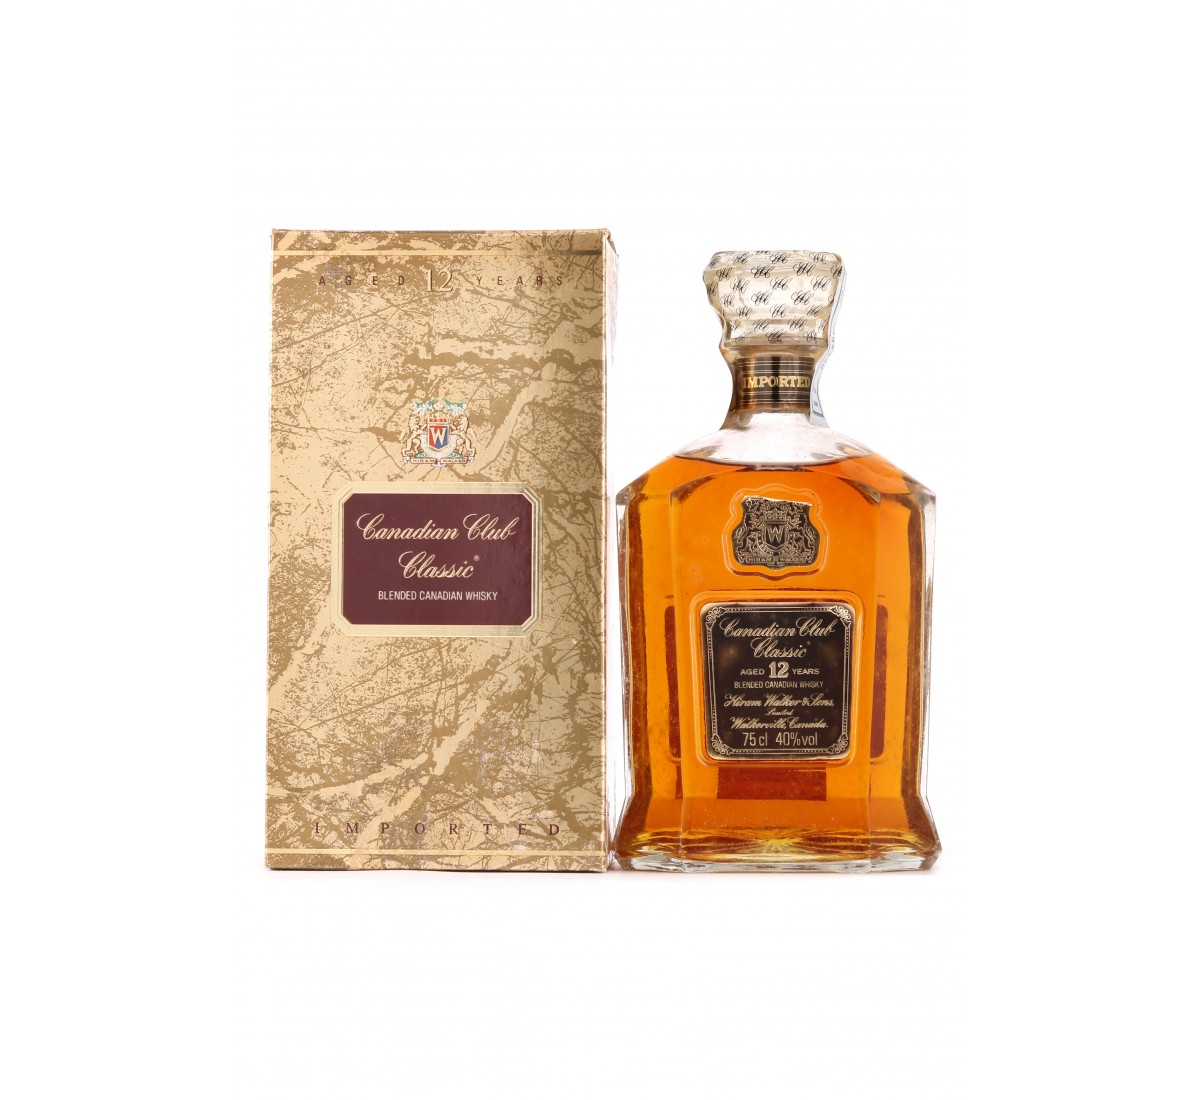 CANADIAN CLUB CLASSIC, Aged 12 Years